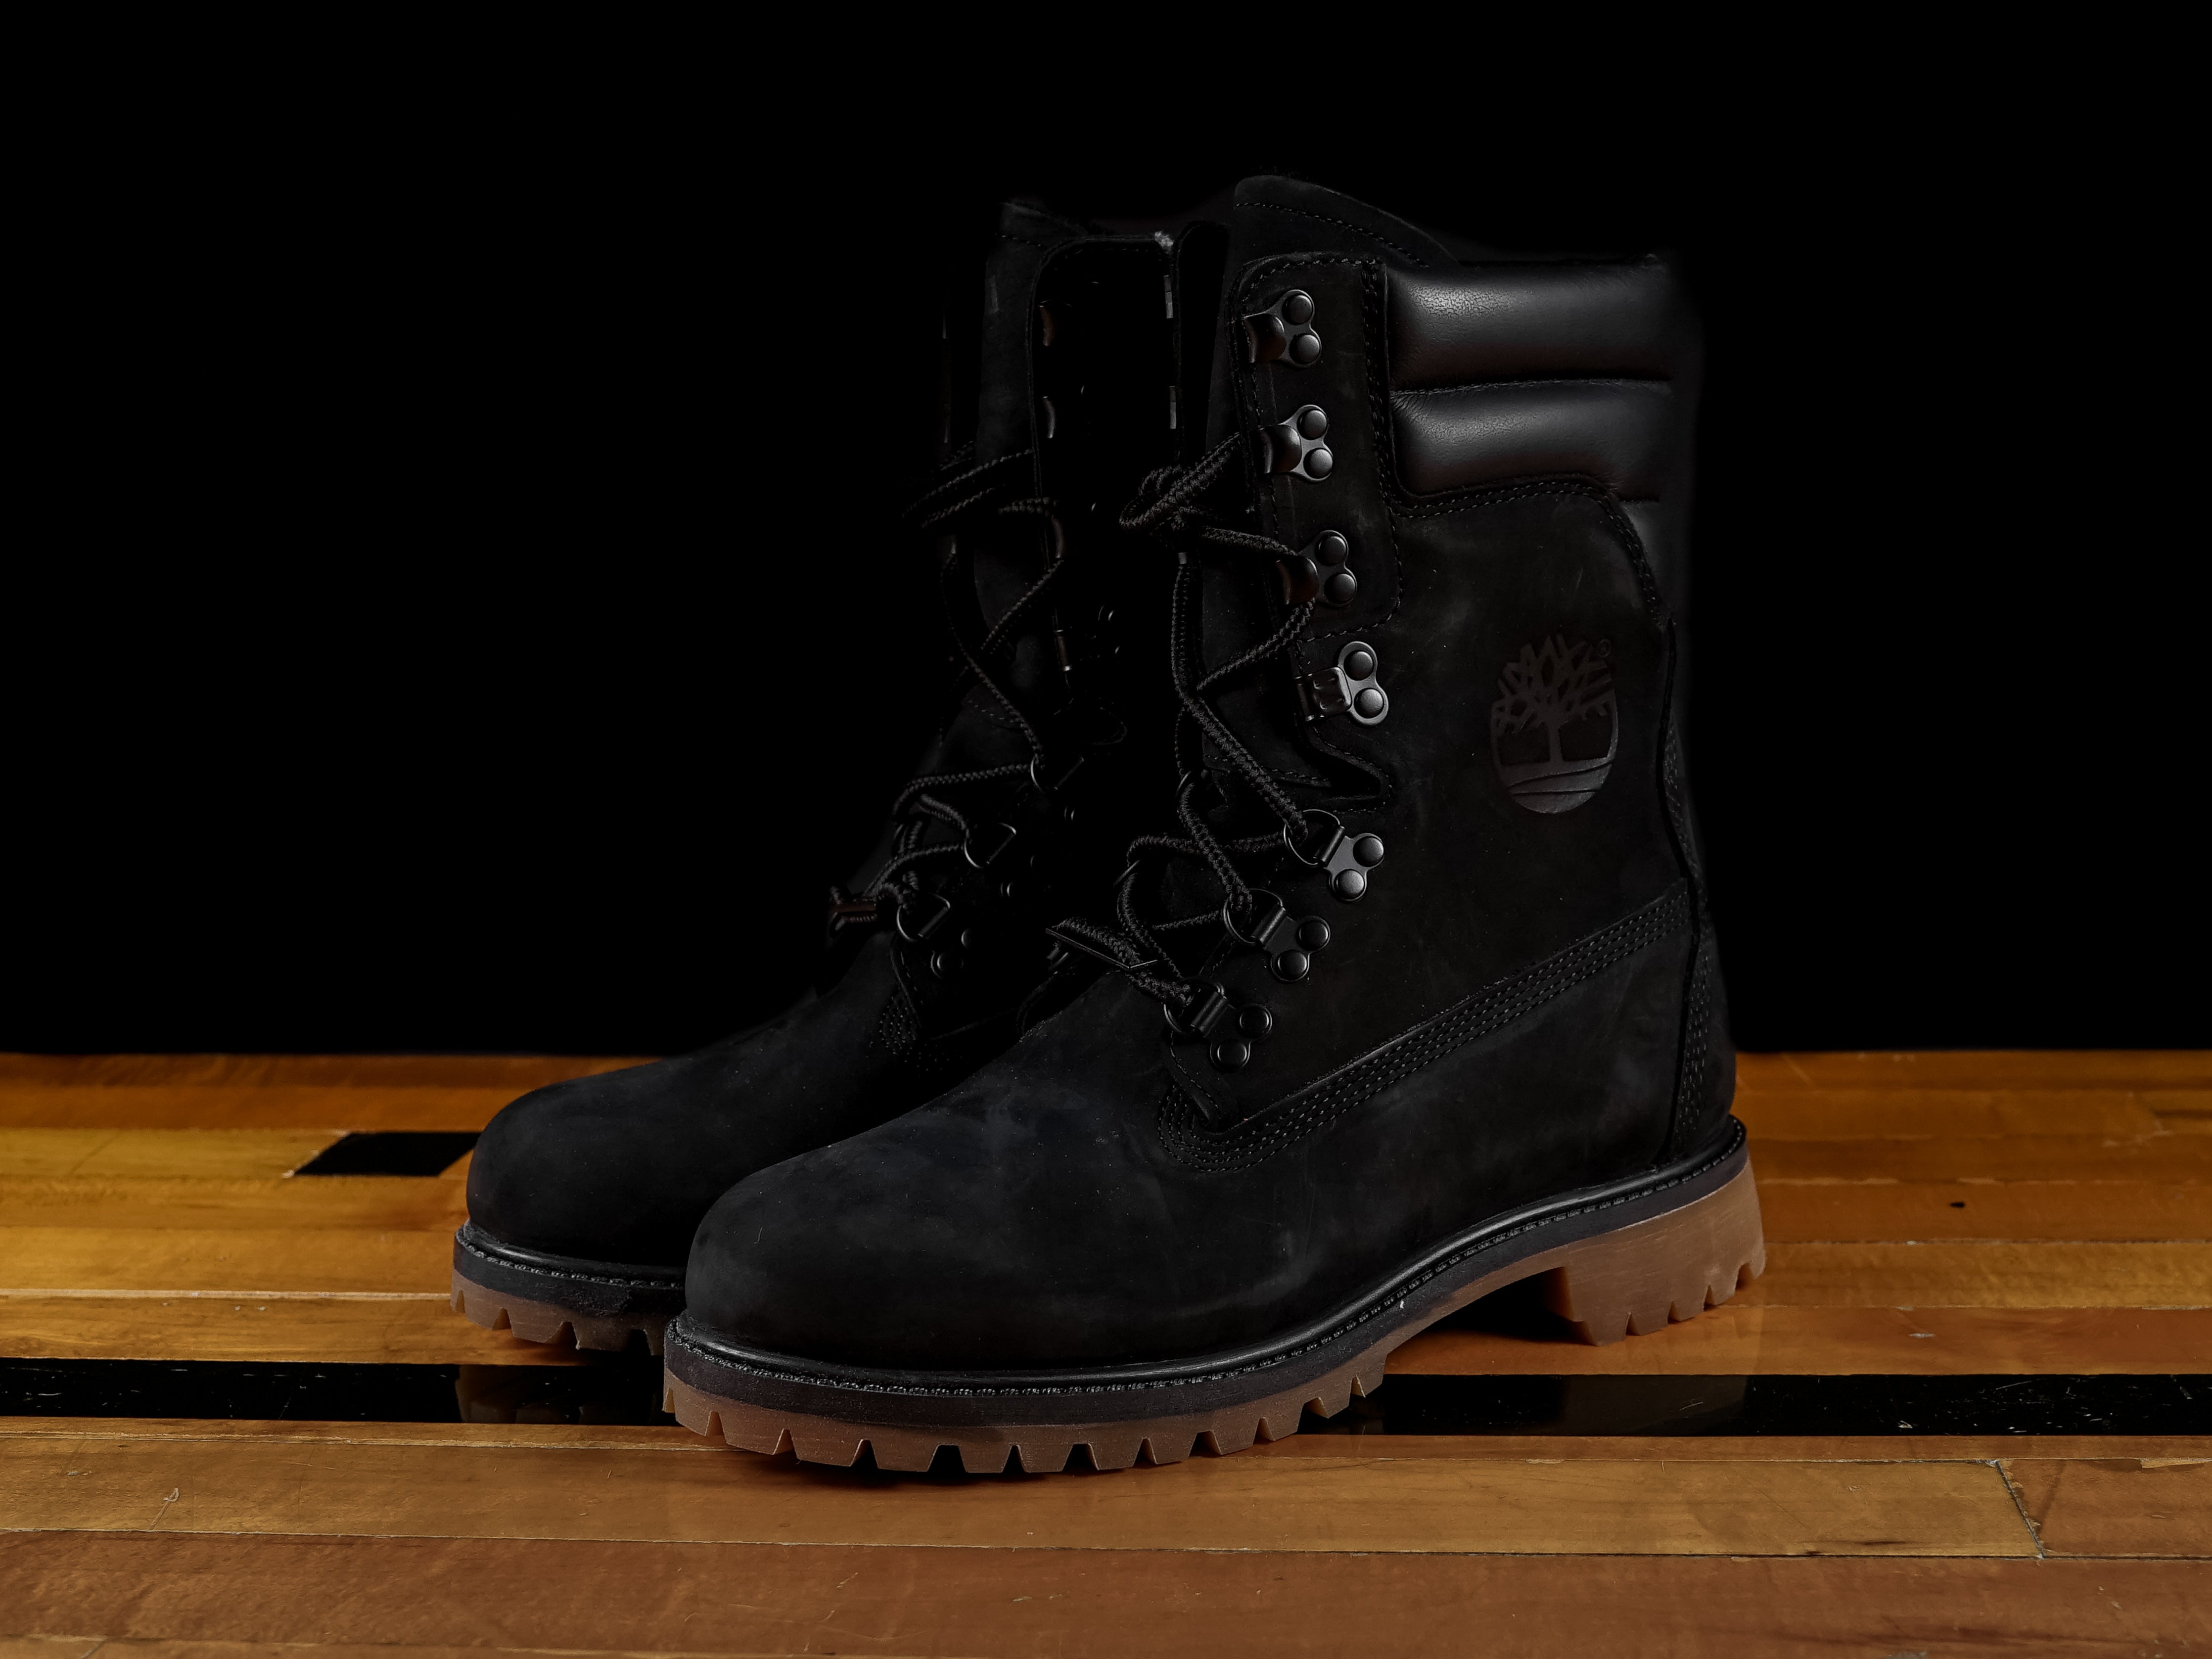 Timberland 8" Waterproof Super Boot [TB0A1UCY]